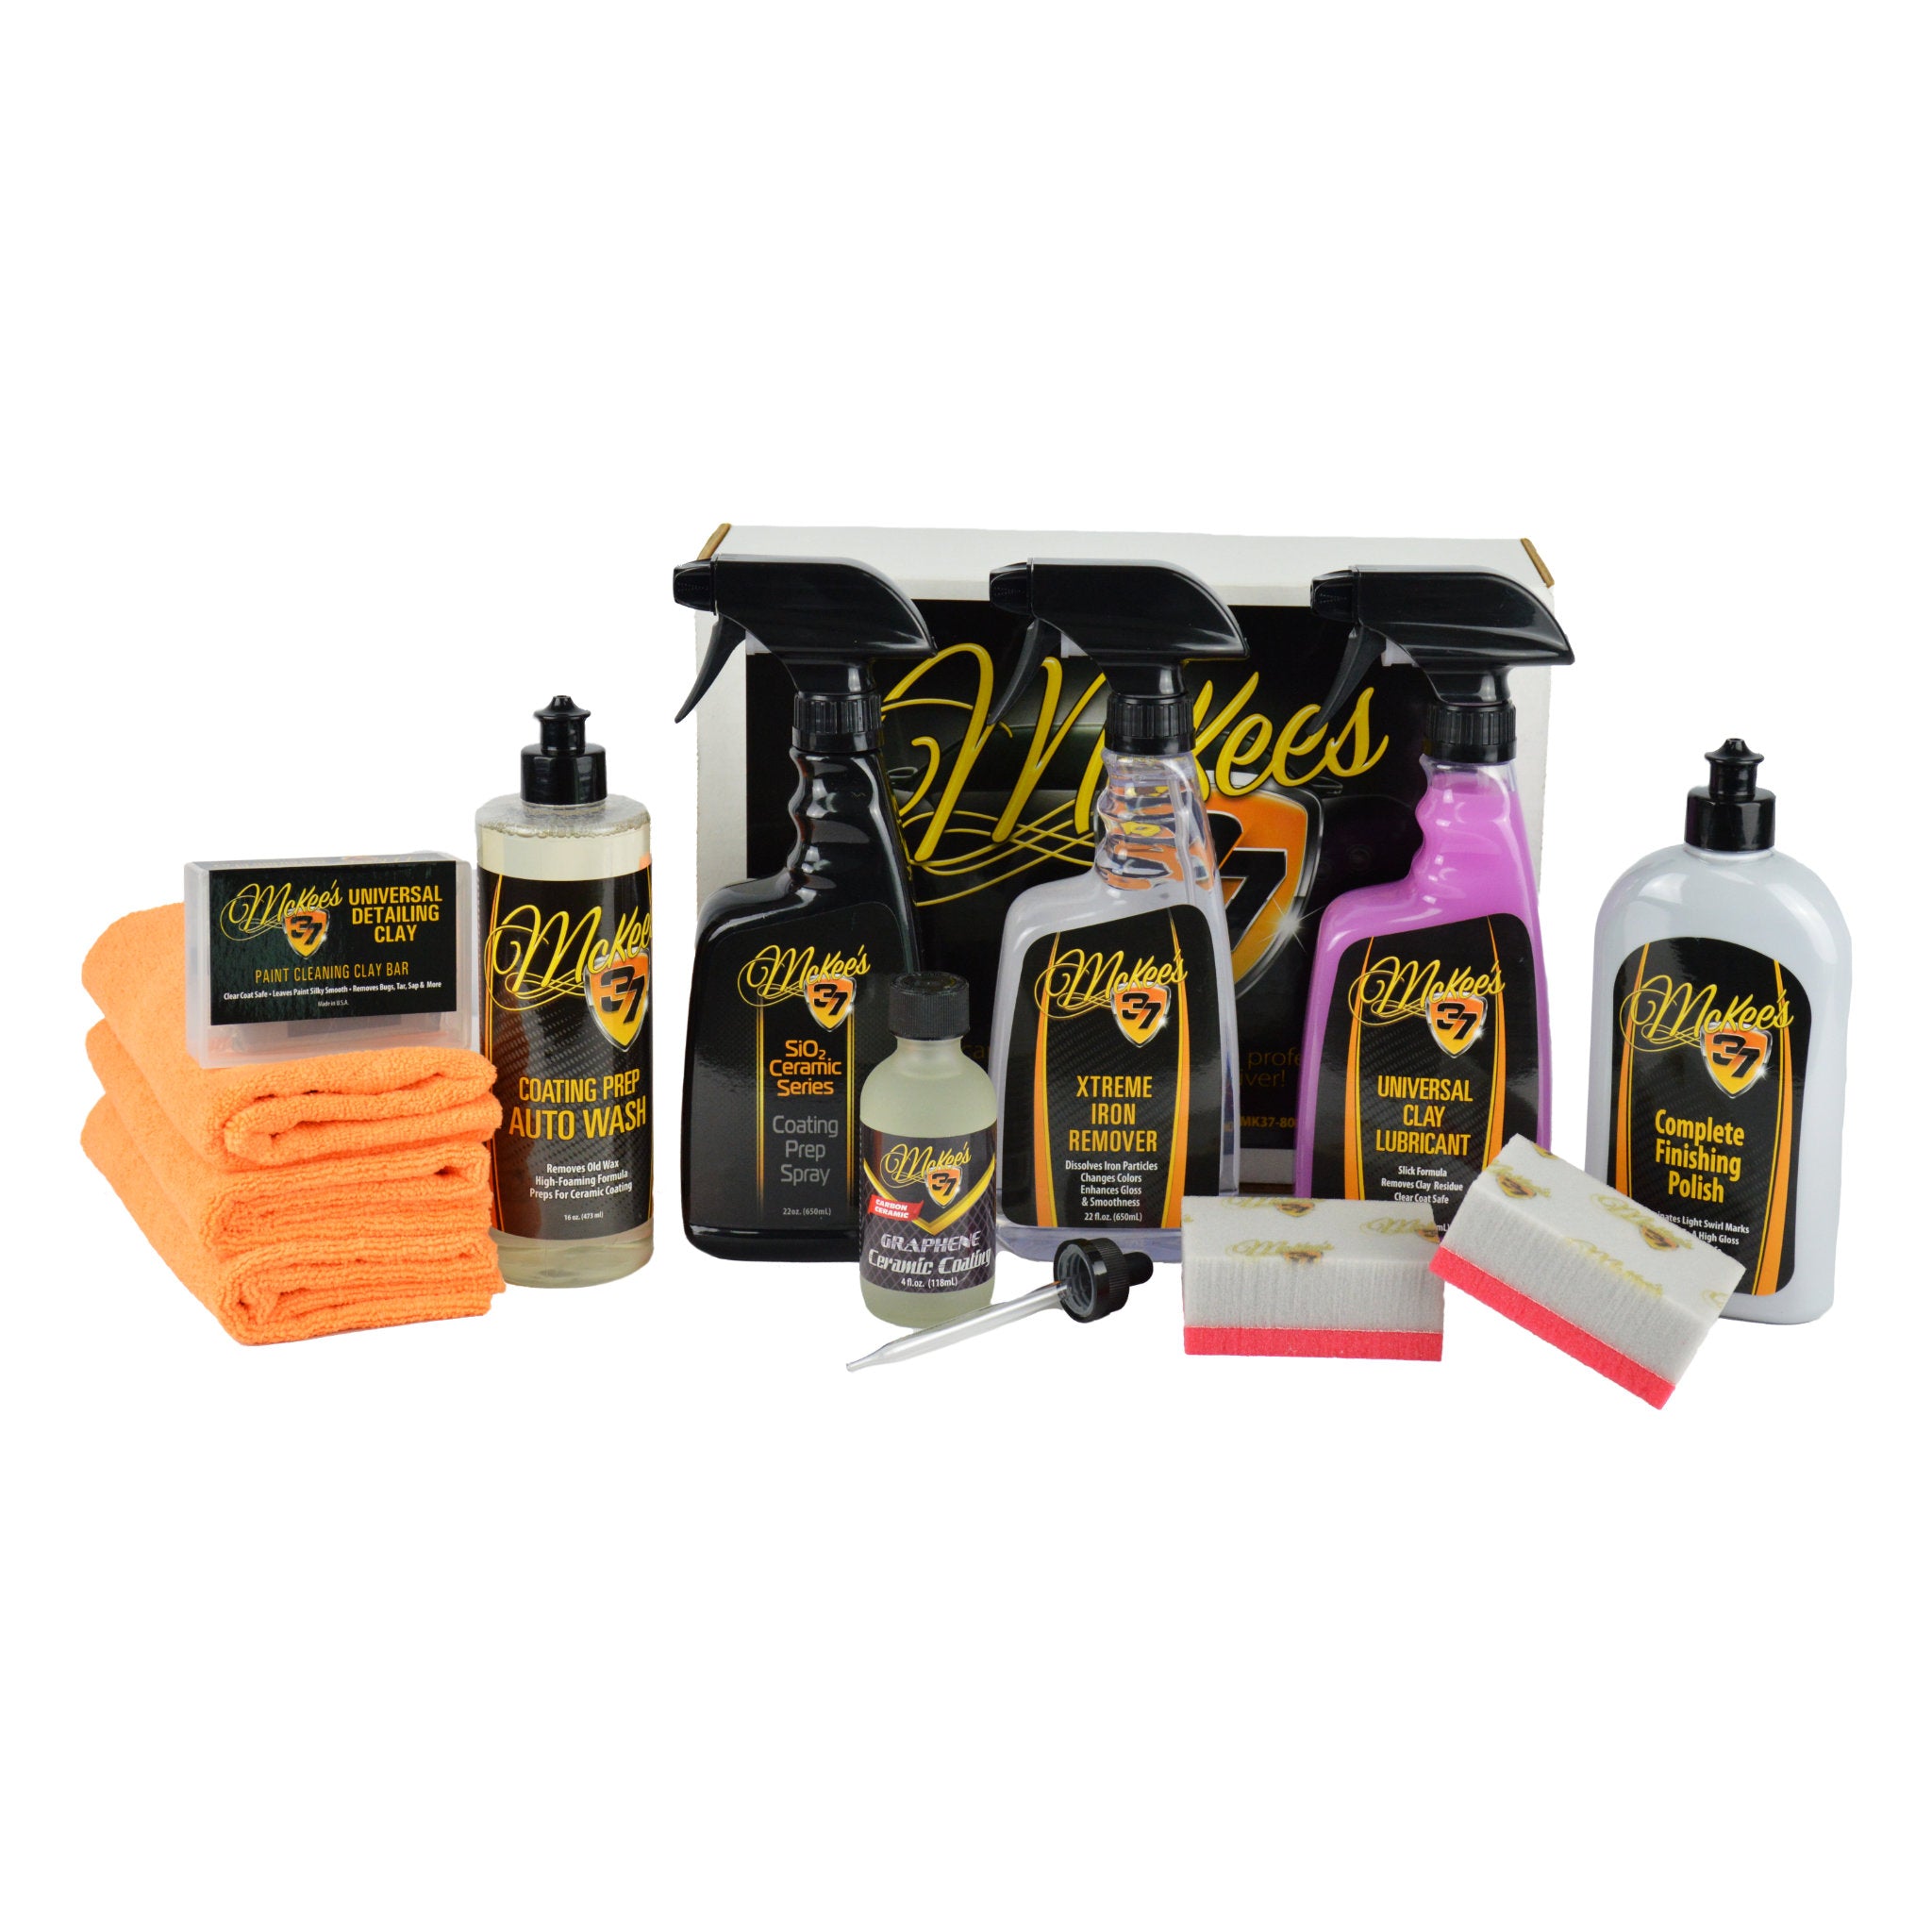 It's so Easy and It Works! $25 Meguiar's Scratch Eraser Kit and